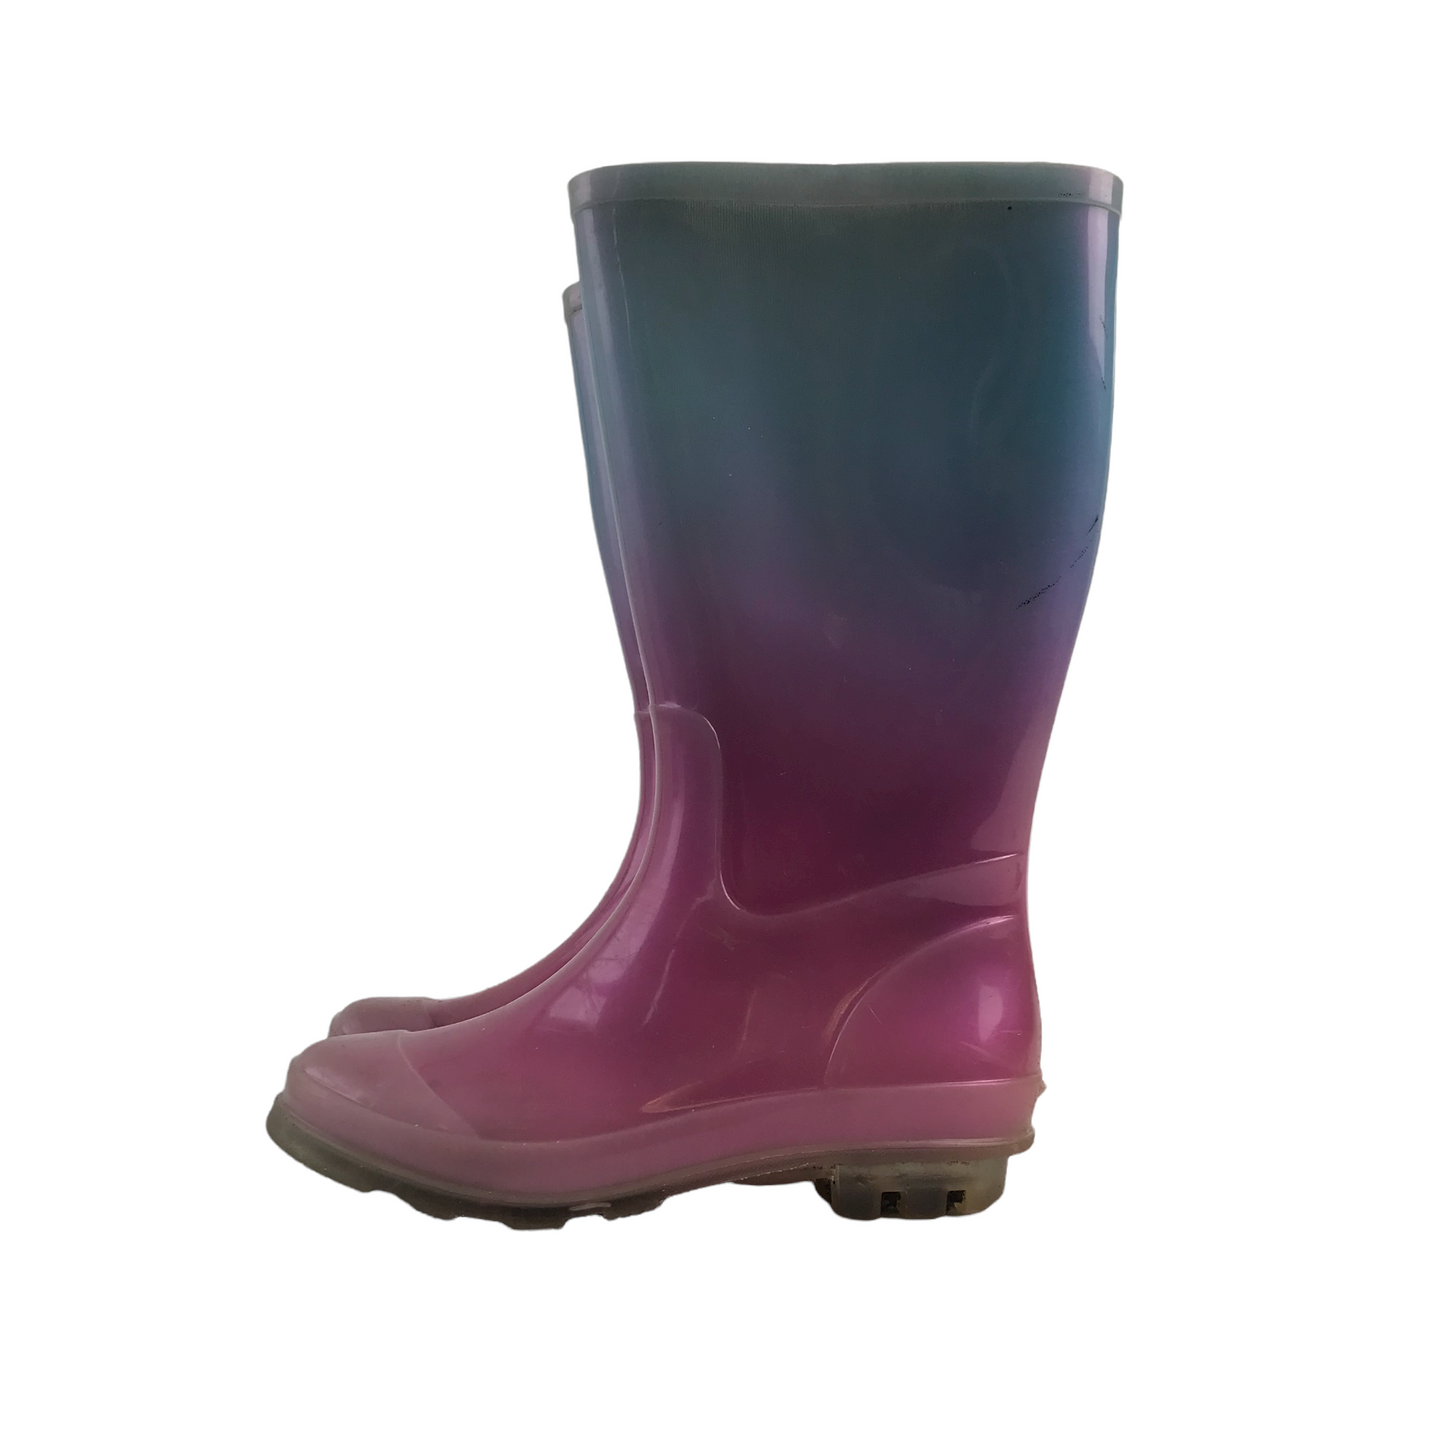 Pastel Blue and Pink  Wellies Shoe Size 11 (jr)